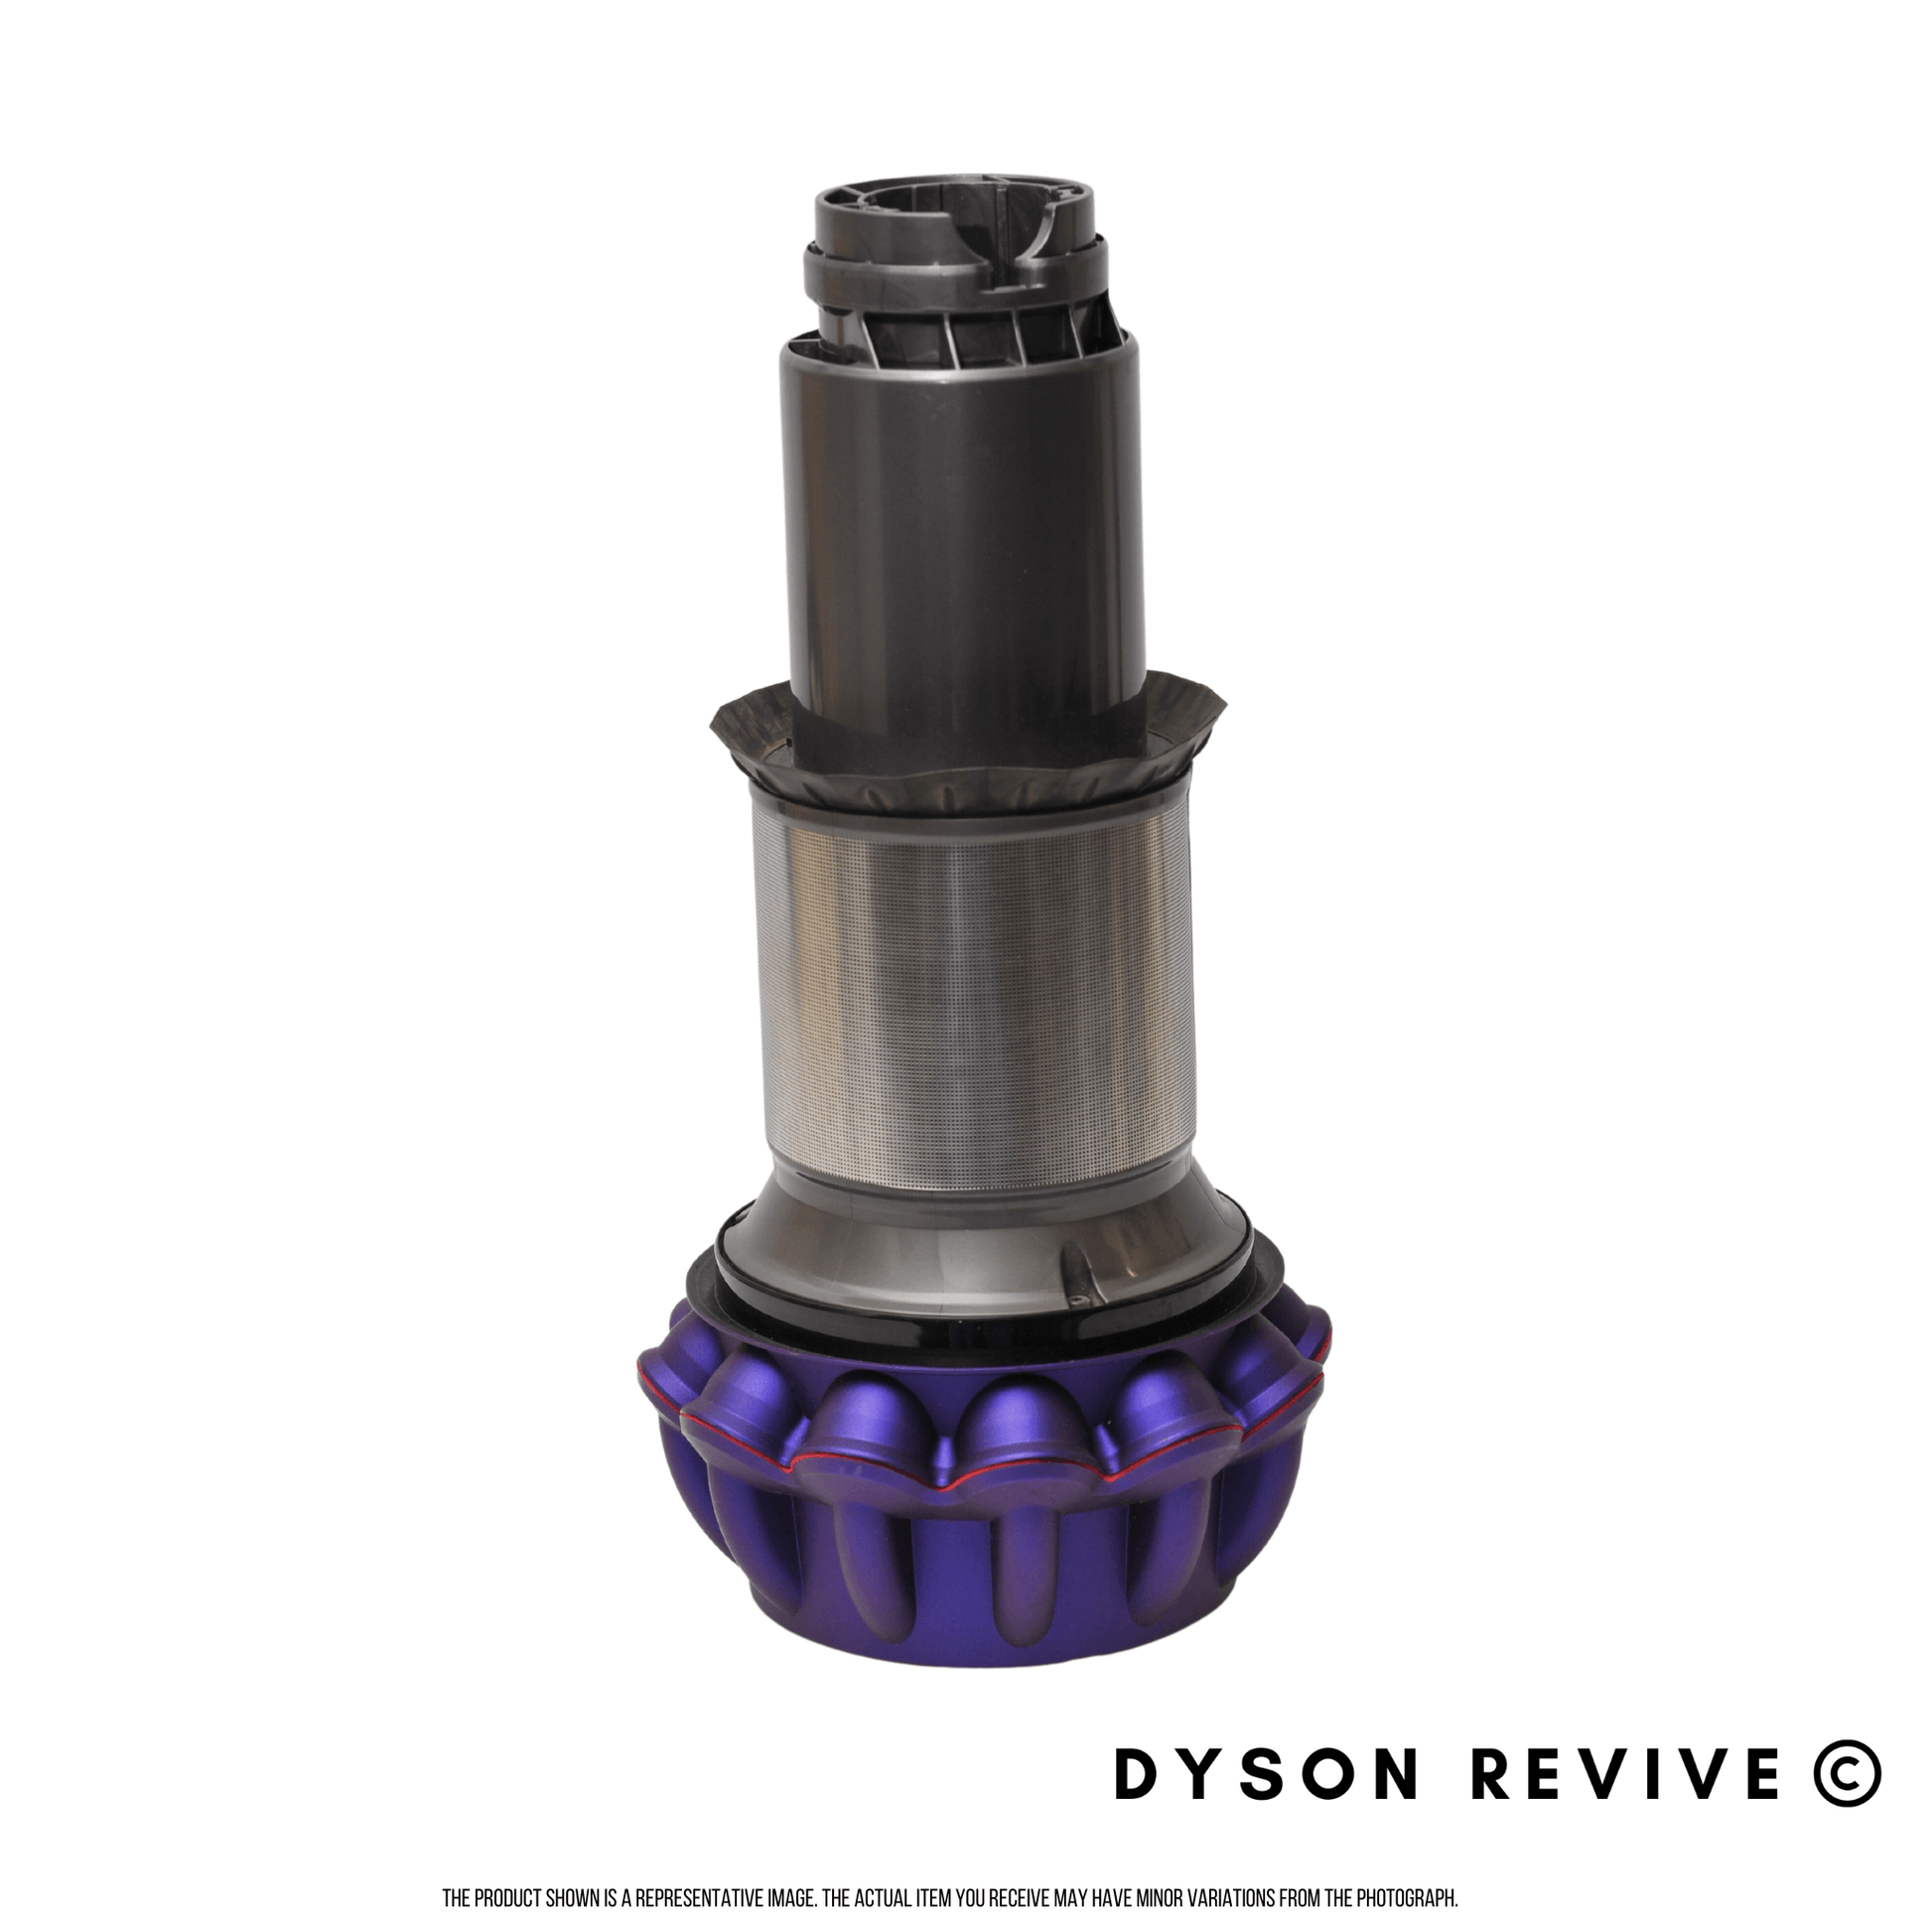 Genuine Refurbished Dyson V10 Cyclone Only - Dyson Revive